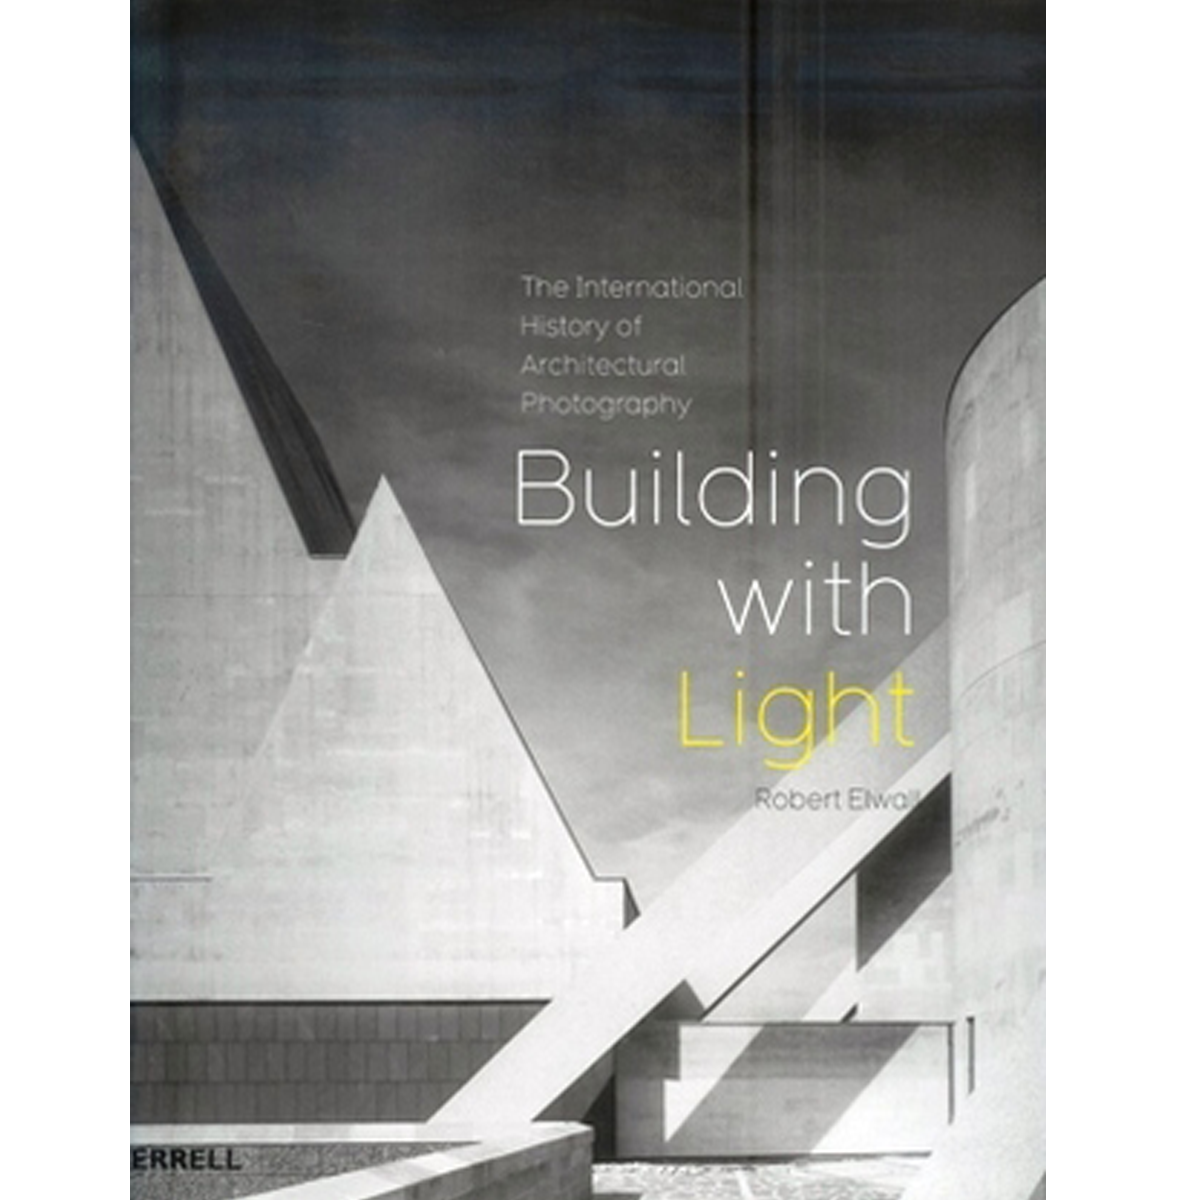 Building with light